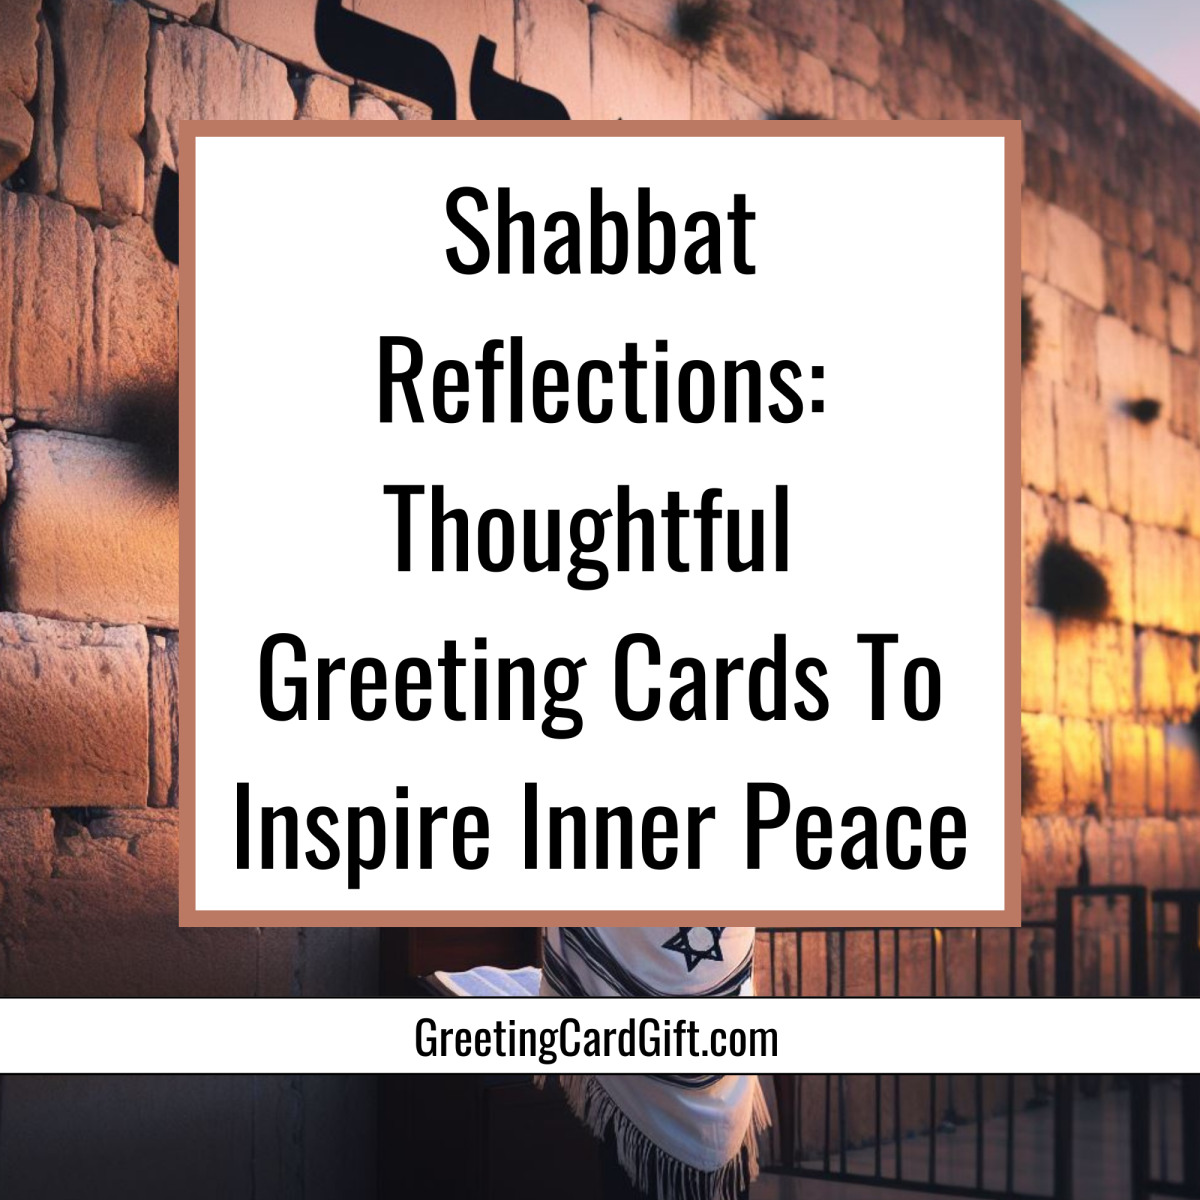 Shabbat Reflections: Thoughtful Greeting Cards To Inspire Inner Peace